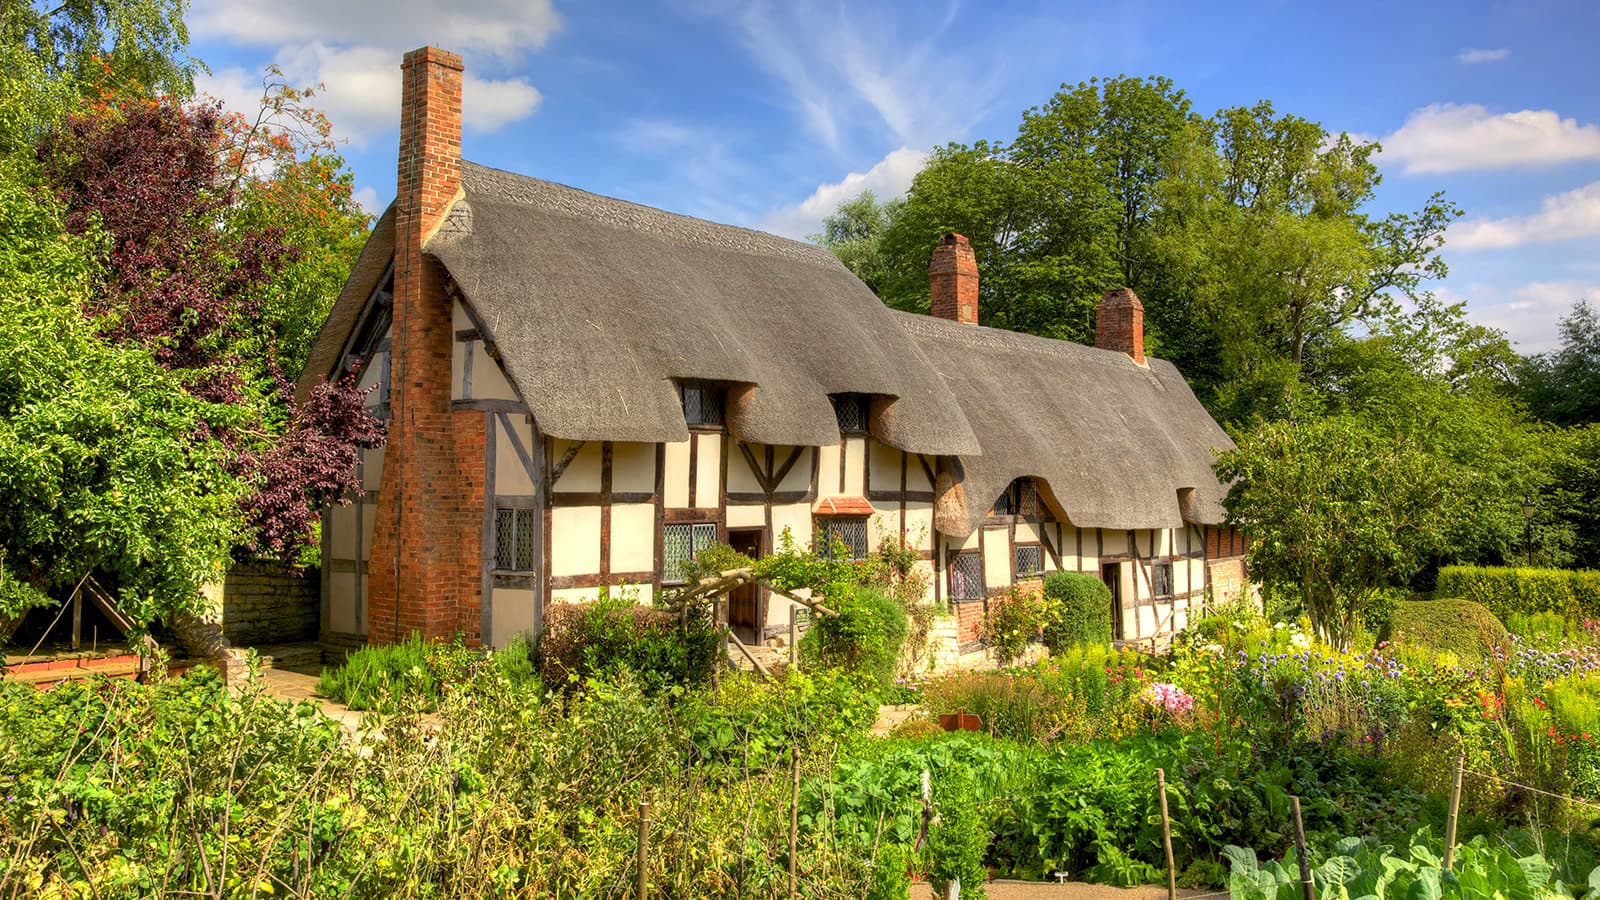 Exterior image of Shakespeare's house in Stratford Upon Avon